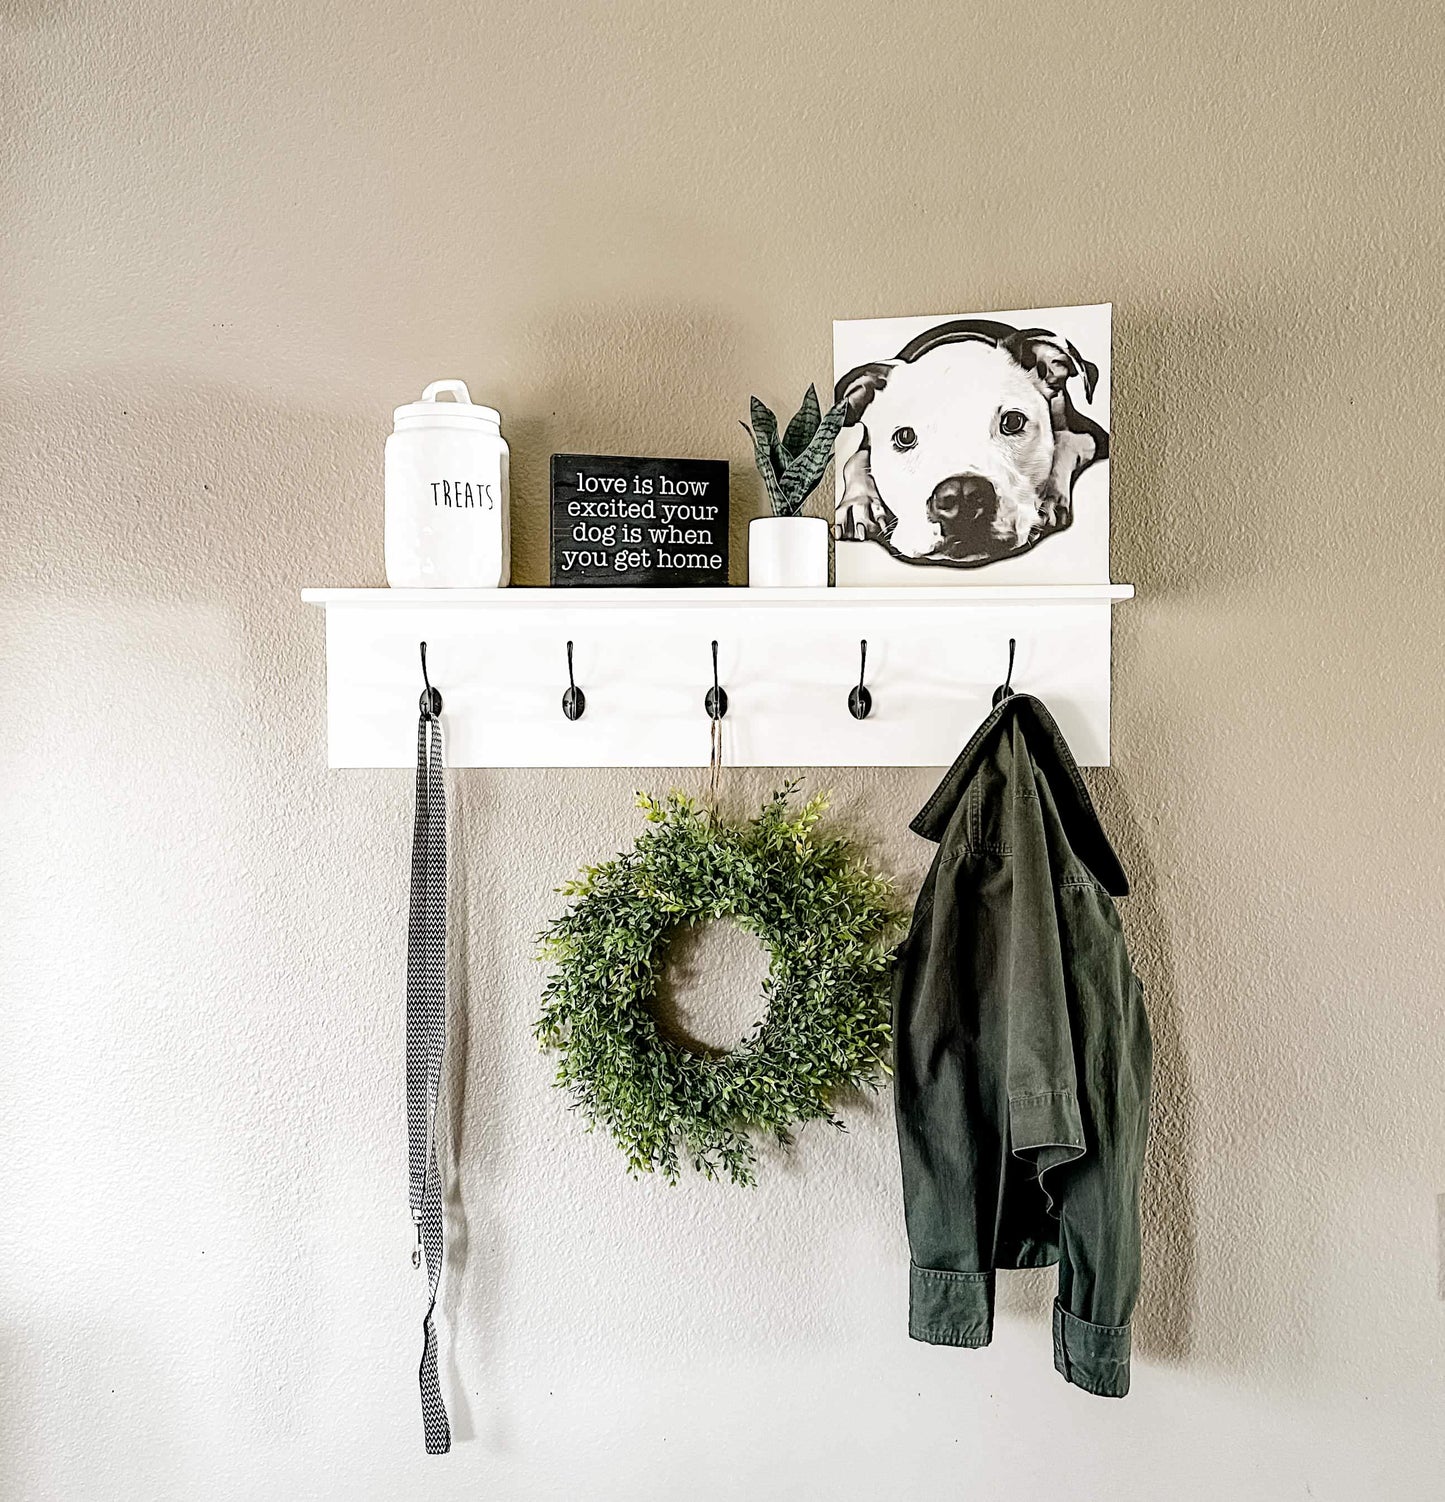 Coat Rack with Shelf in Soft White for Living Room, Entry Way, Mudroom, Etc.